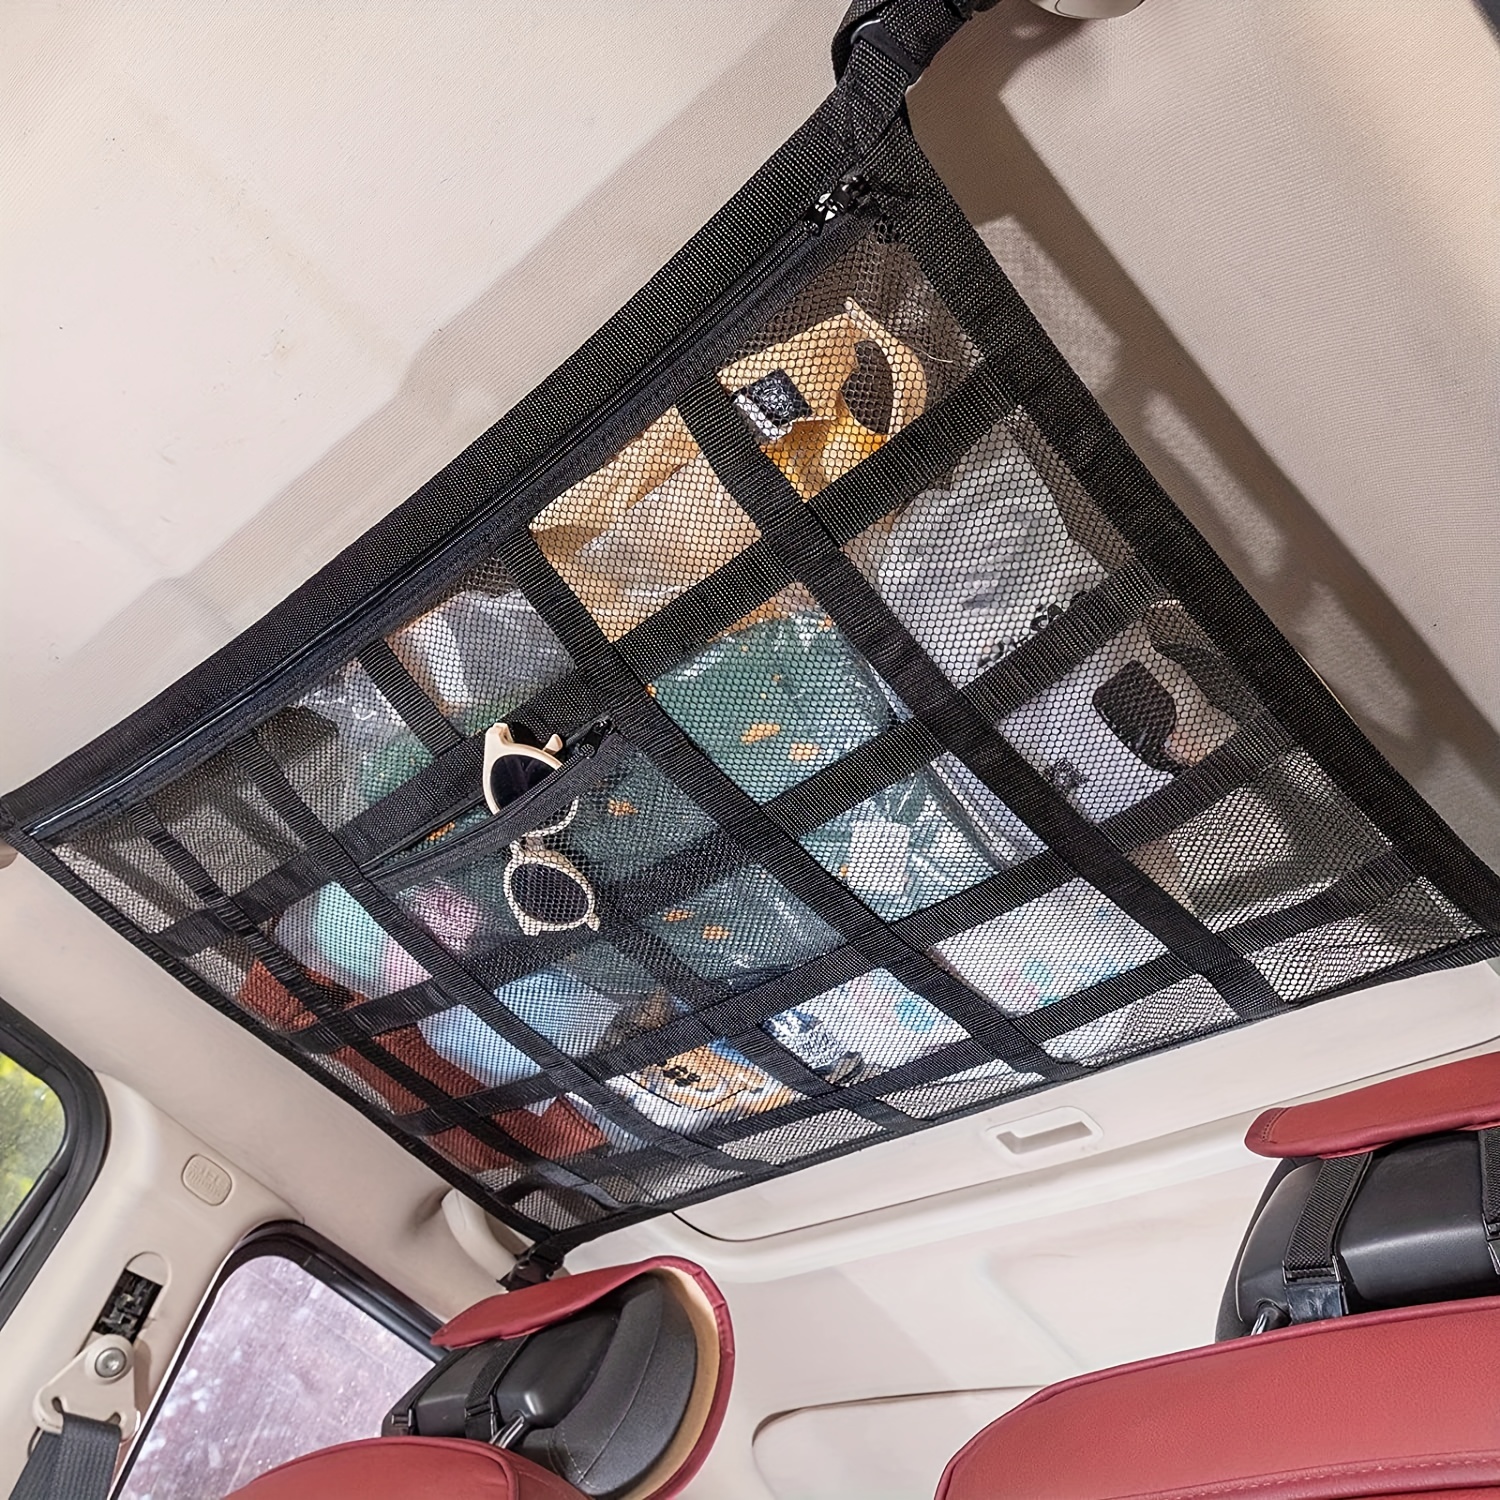 Auto Stowing Tidying Interior Accessories - Car Ceiling Storage